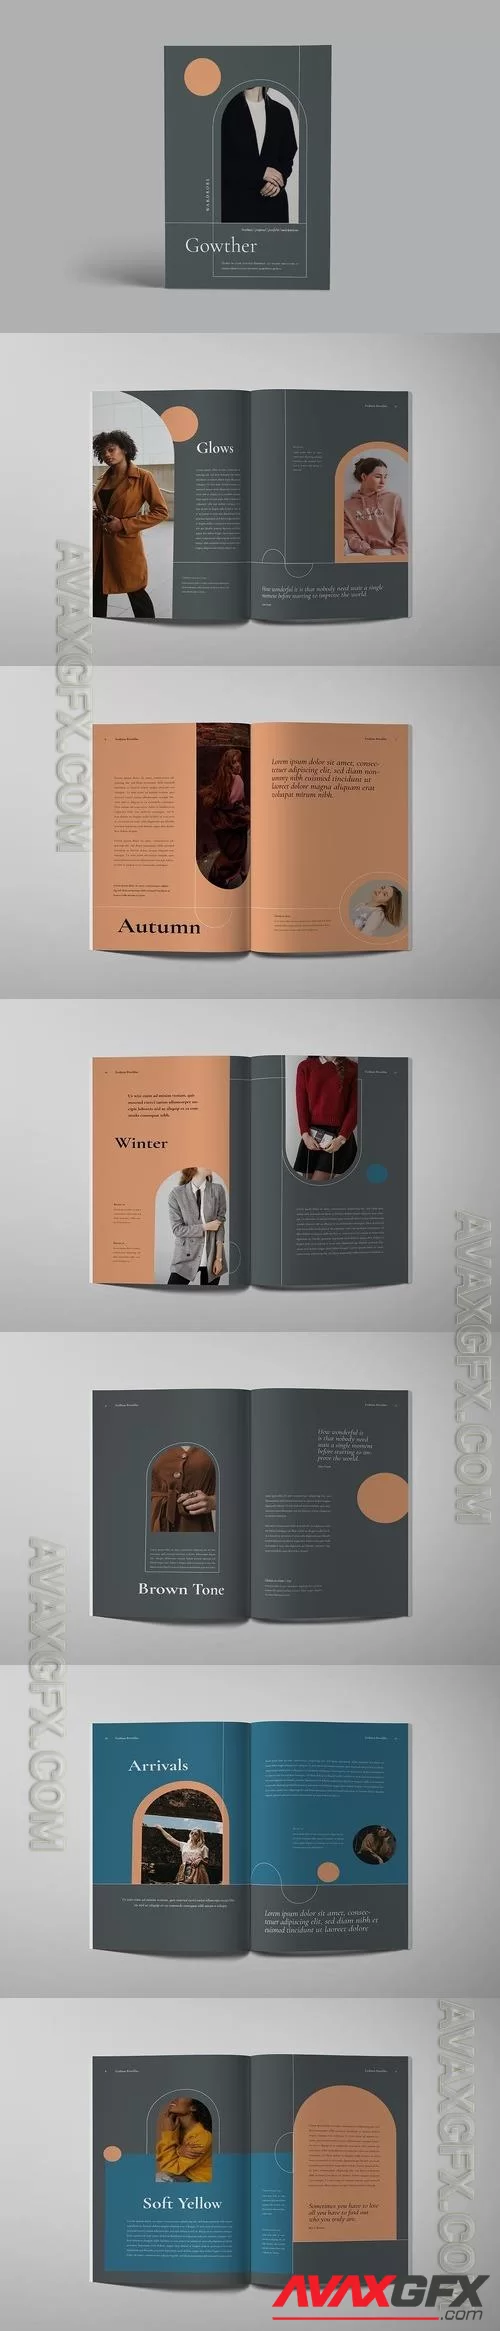 Gowther - Brochure